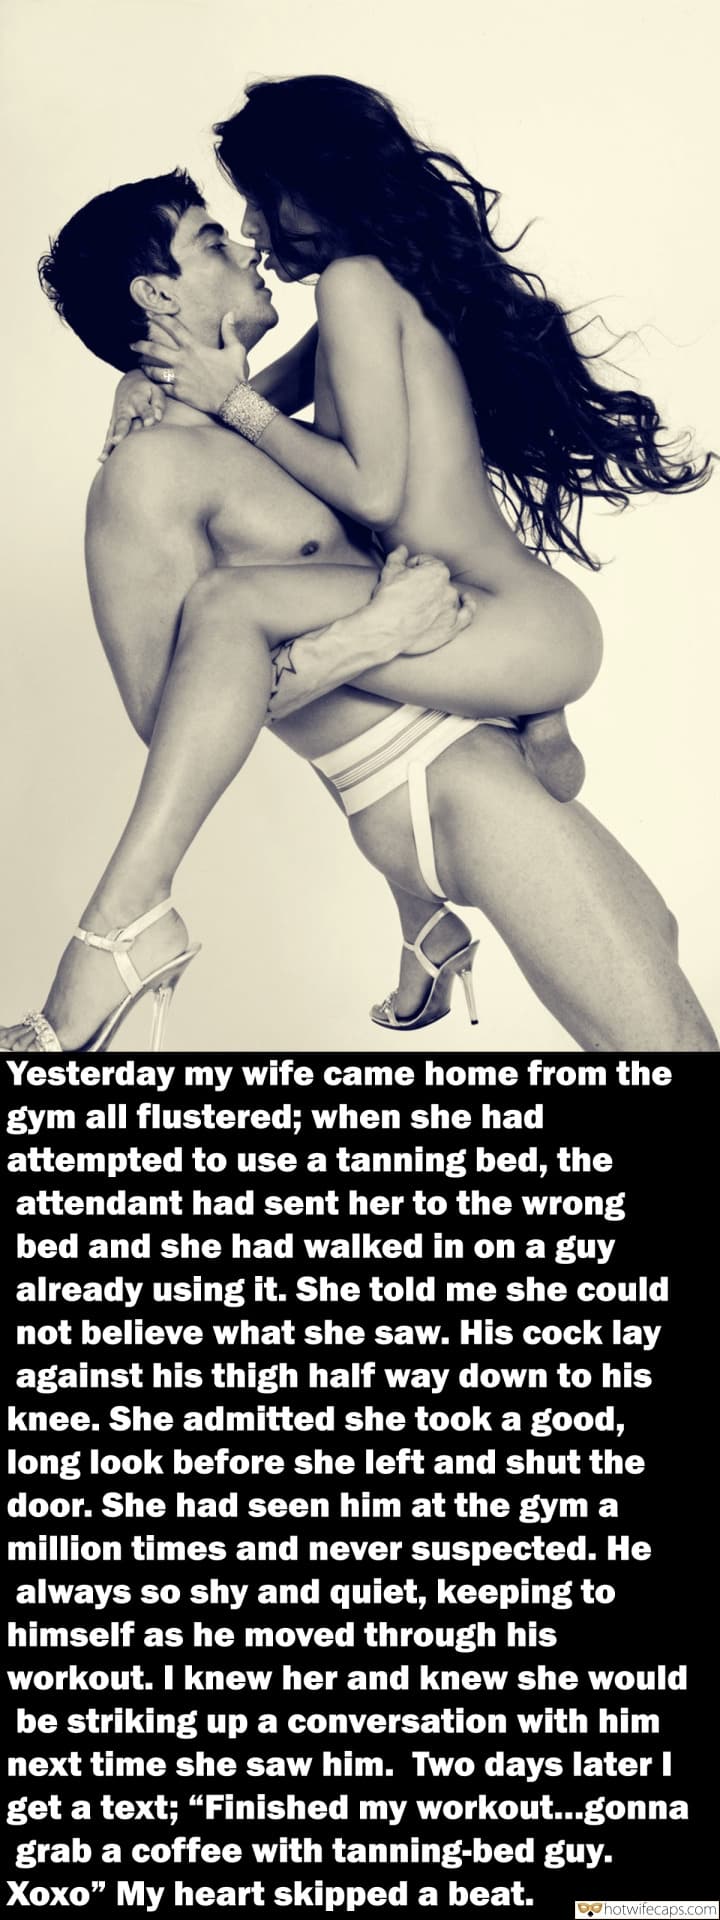 Cheating hotwife caption: Yesterday my wife came home from the gym all flustered; when she had attempted to use a tanning bed, the attendant had sent her to the wrong bed and she had walked in on a guy already using it. She...